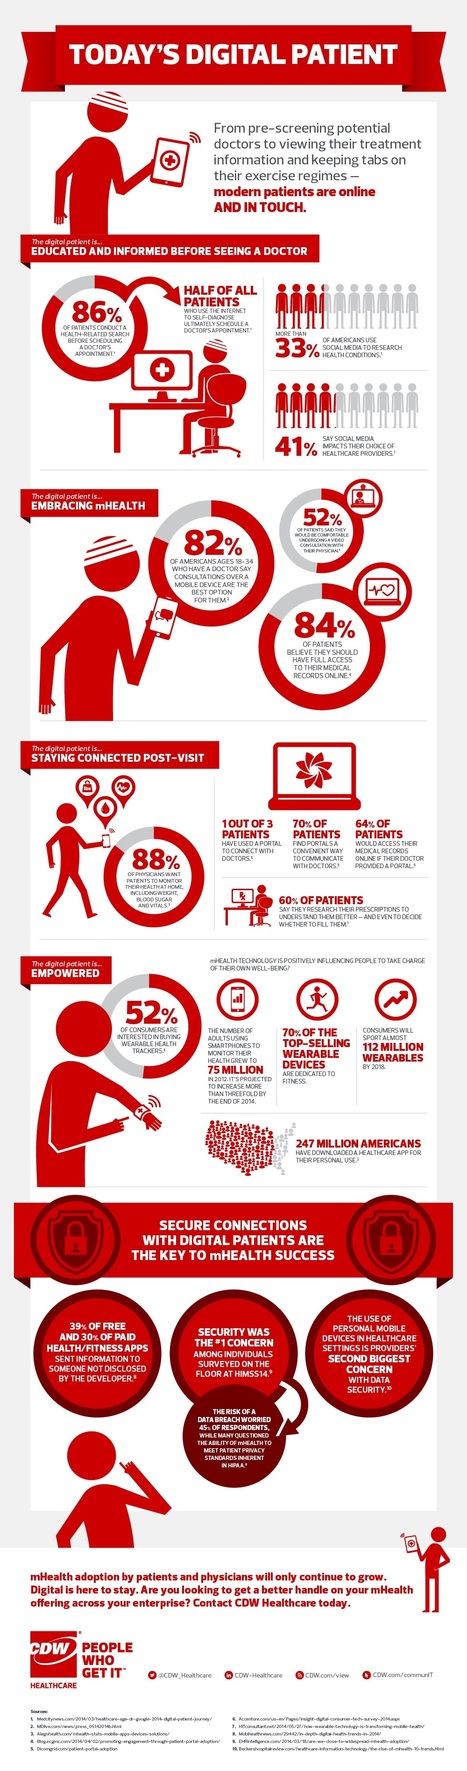 Infographic: Today's Digital Patient | Daily Magazine | Scoop.it